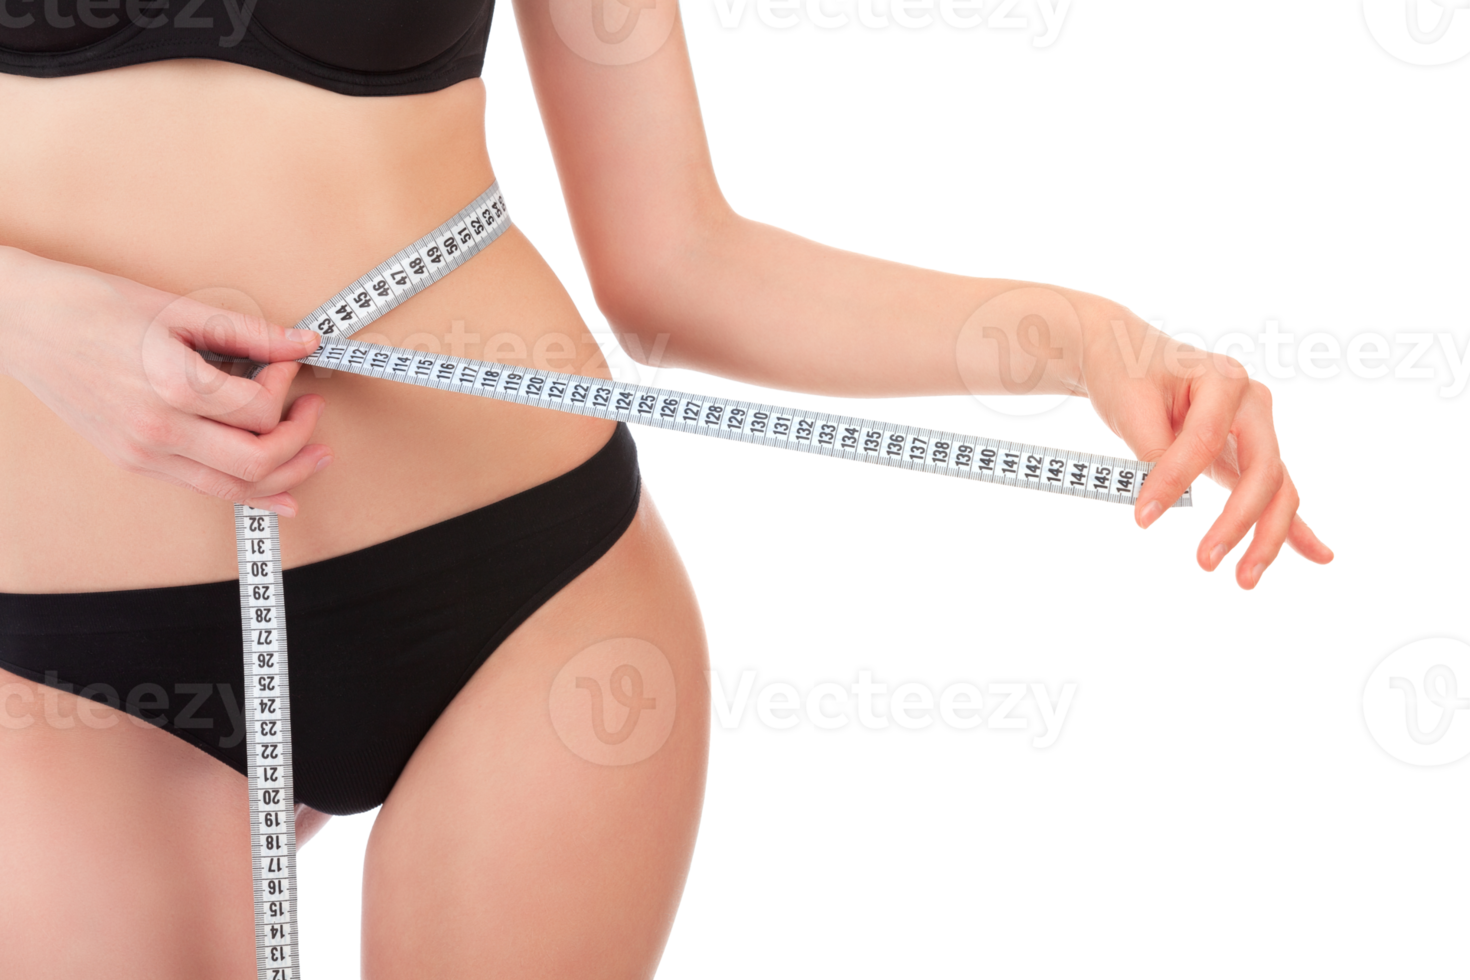 Slender woman measuring her waist with metric tape measure after a diet, isolated png